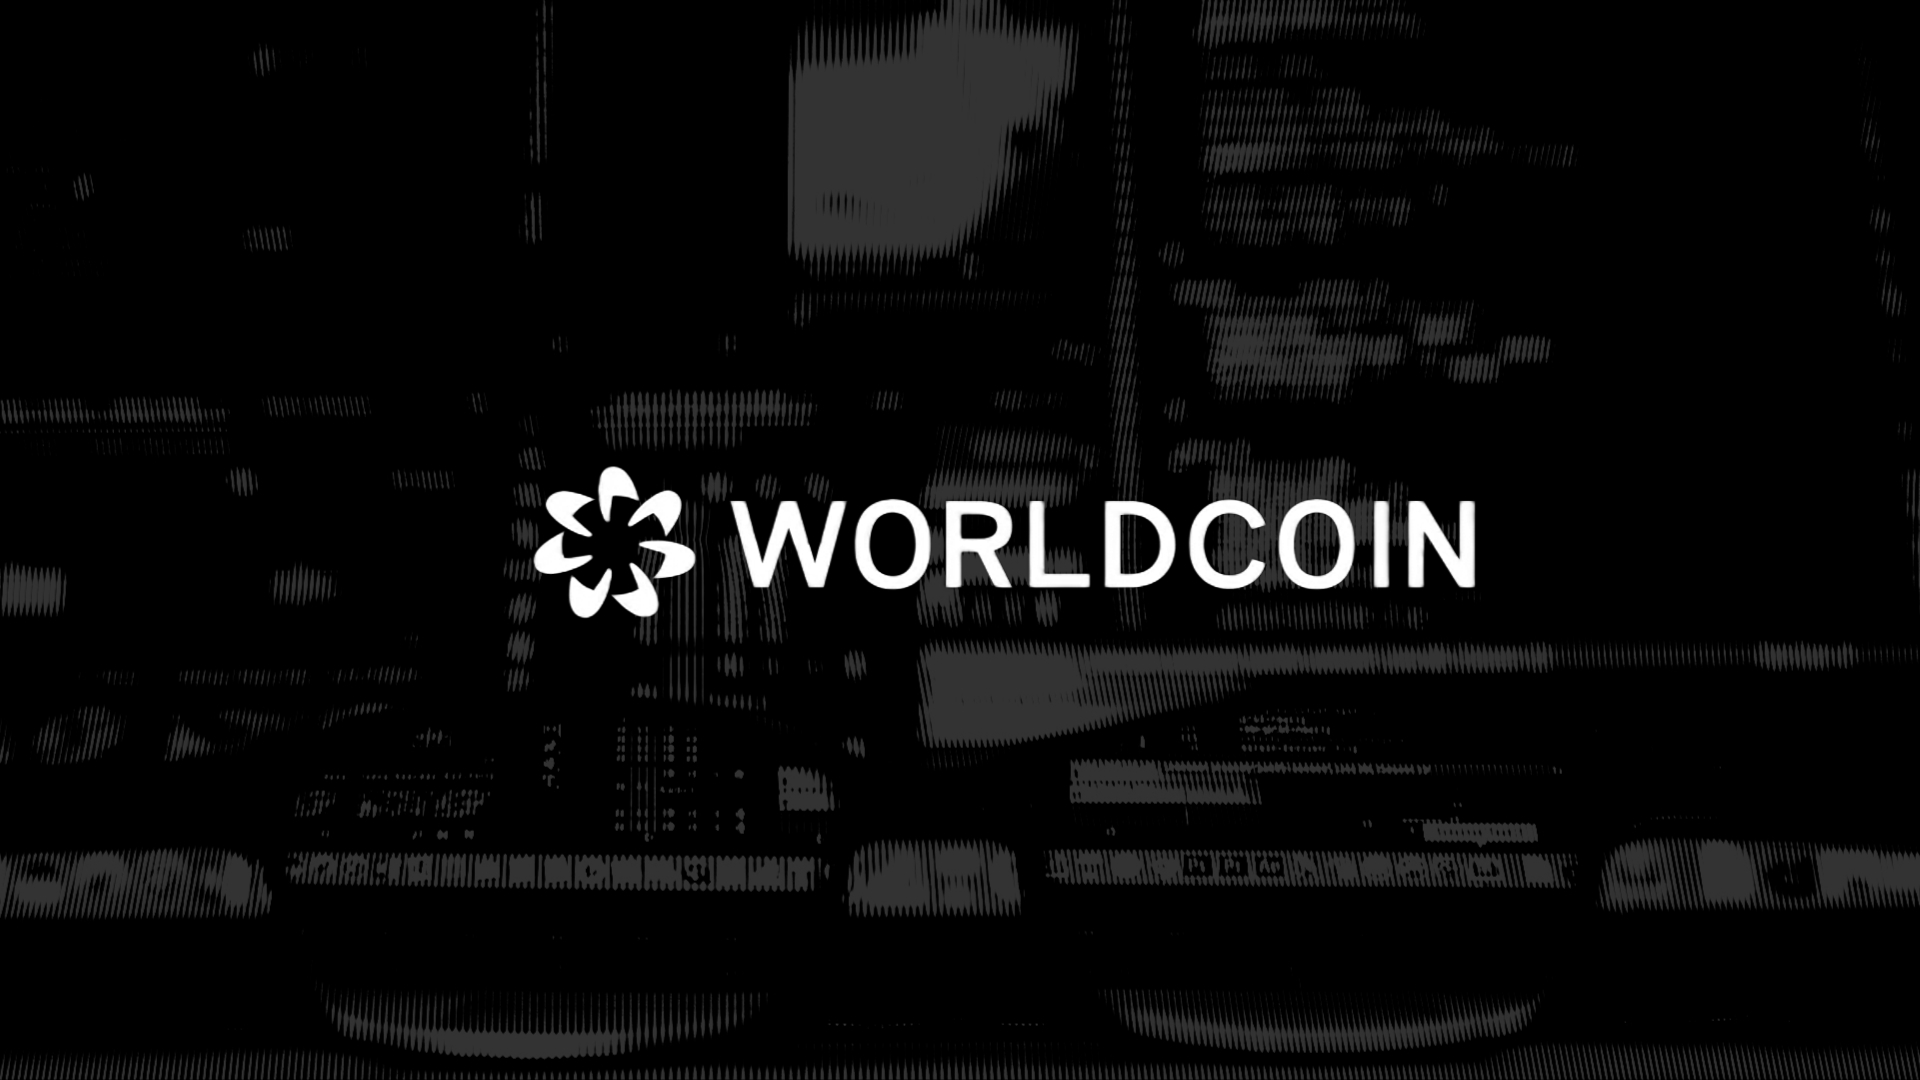 OpenAI CEO Secures $100M Funding For Worldcoin Crypto Project